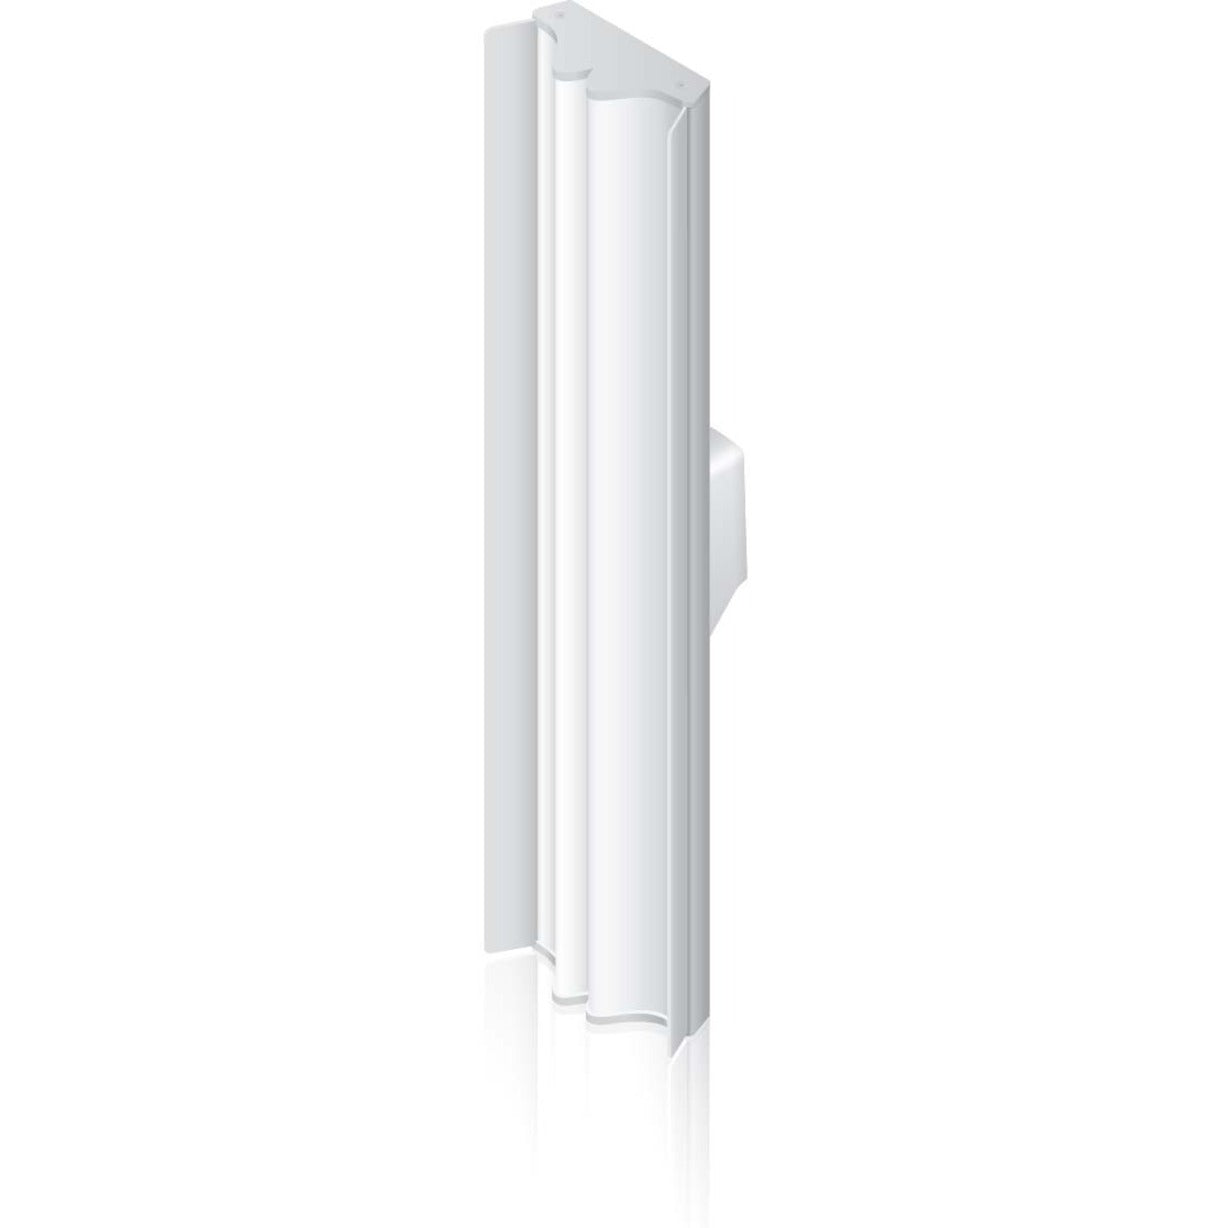 Ubiquiti AM-5AC21-60 5 GHz 2x2 MIMO BaseStation Sector Antenna, Enhanced Signal Strength and Coverage